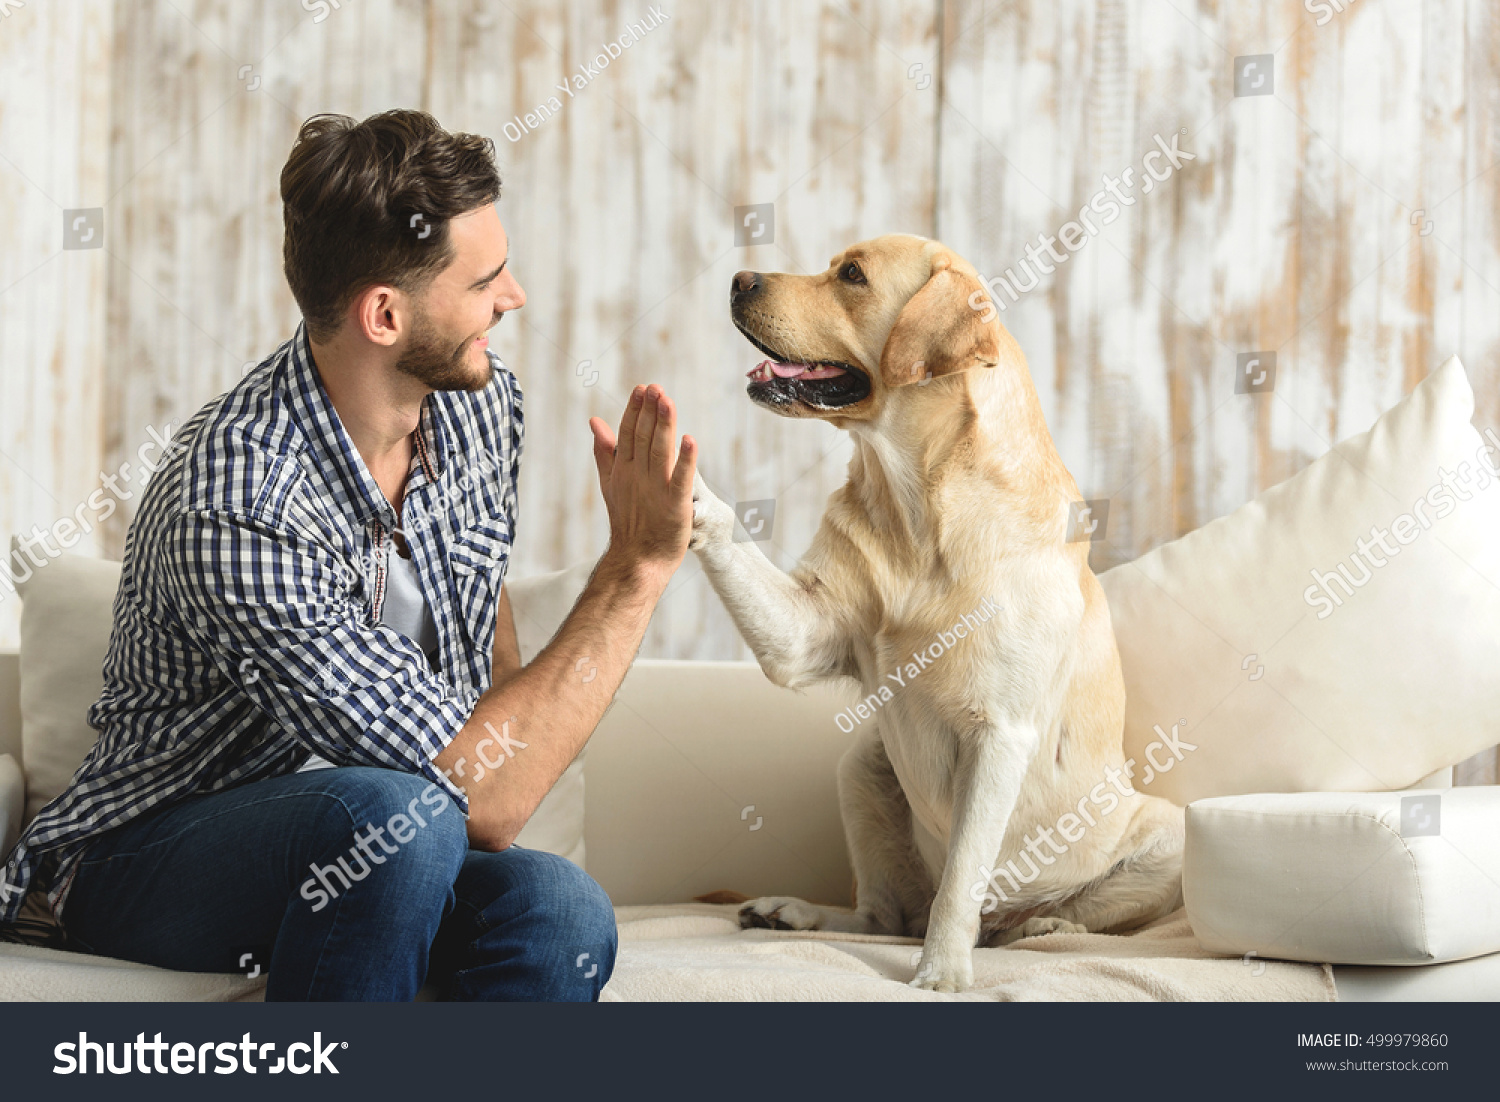 happy guy sitting on a sofa and looking at dog #499979860